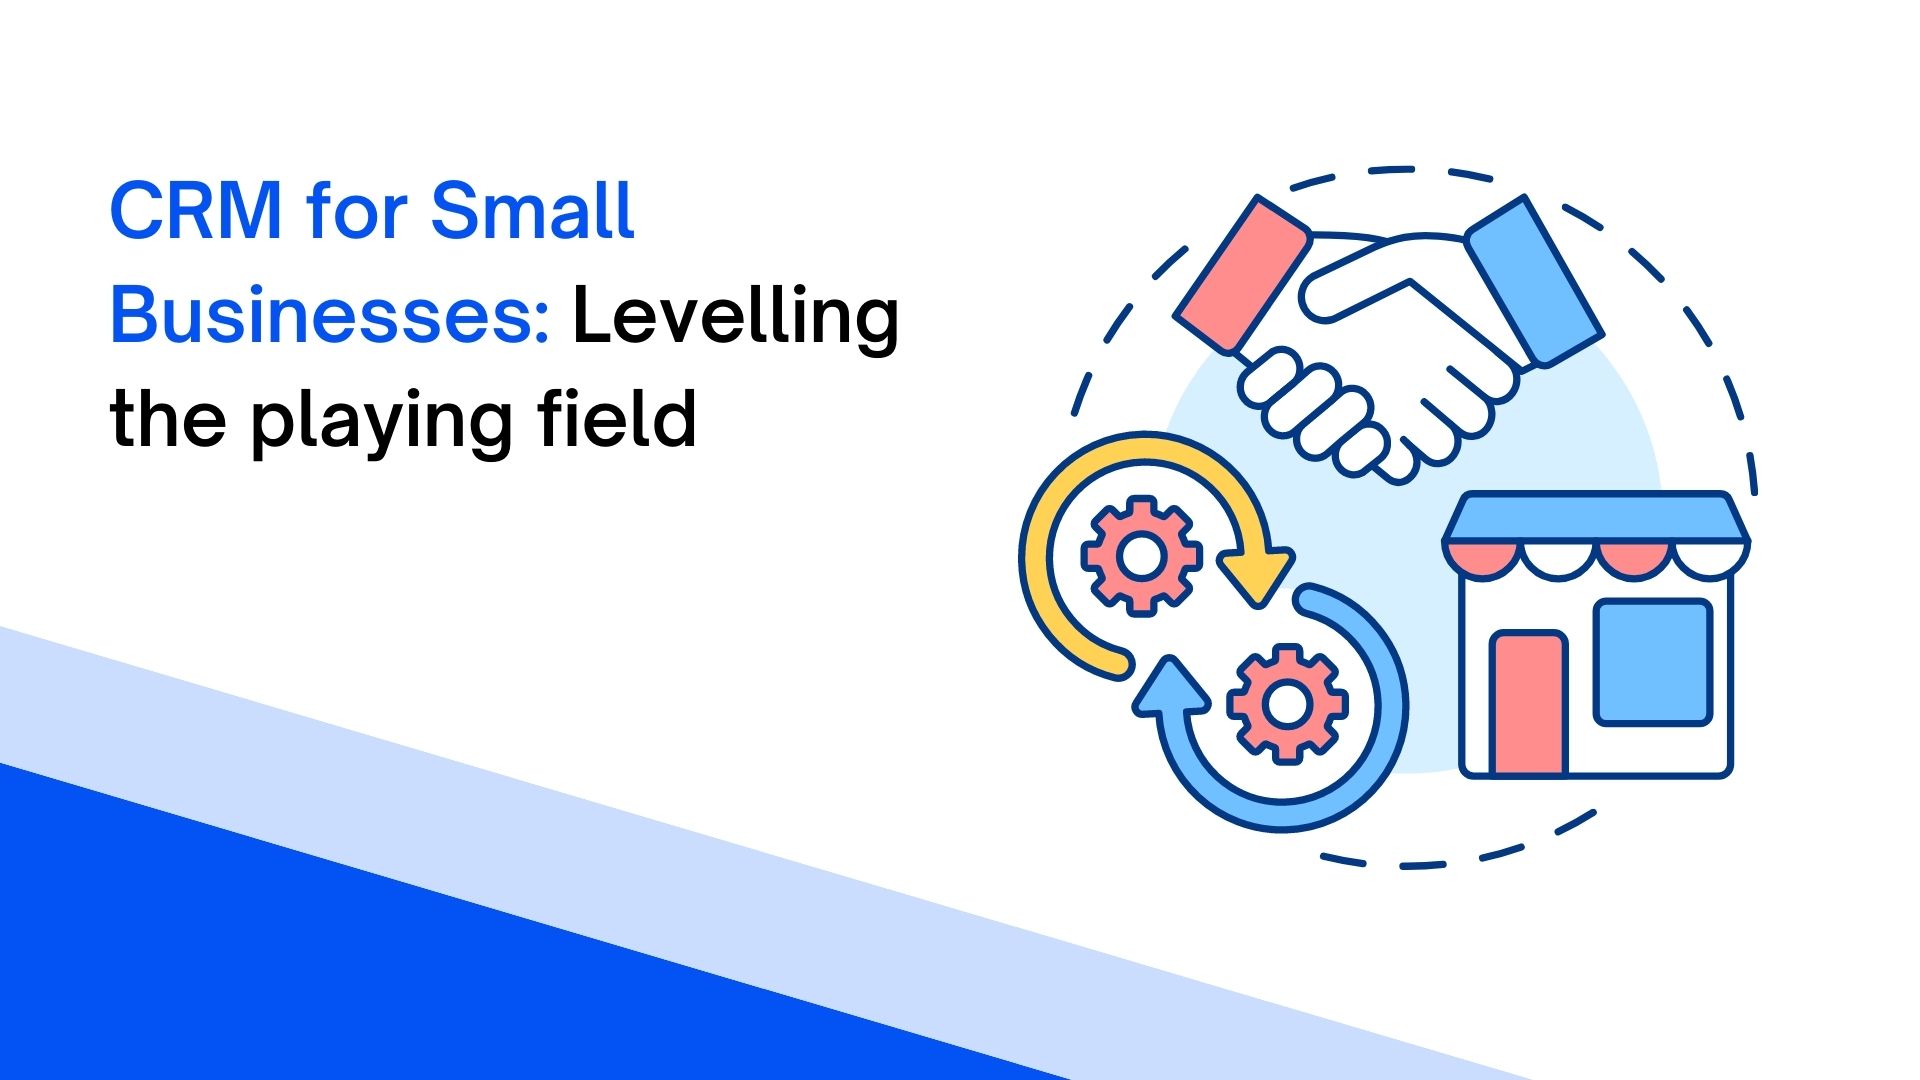 CRM for Small Businesses: Levelling the Playing Field